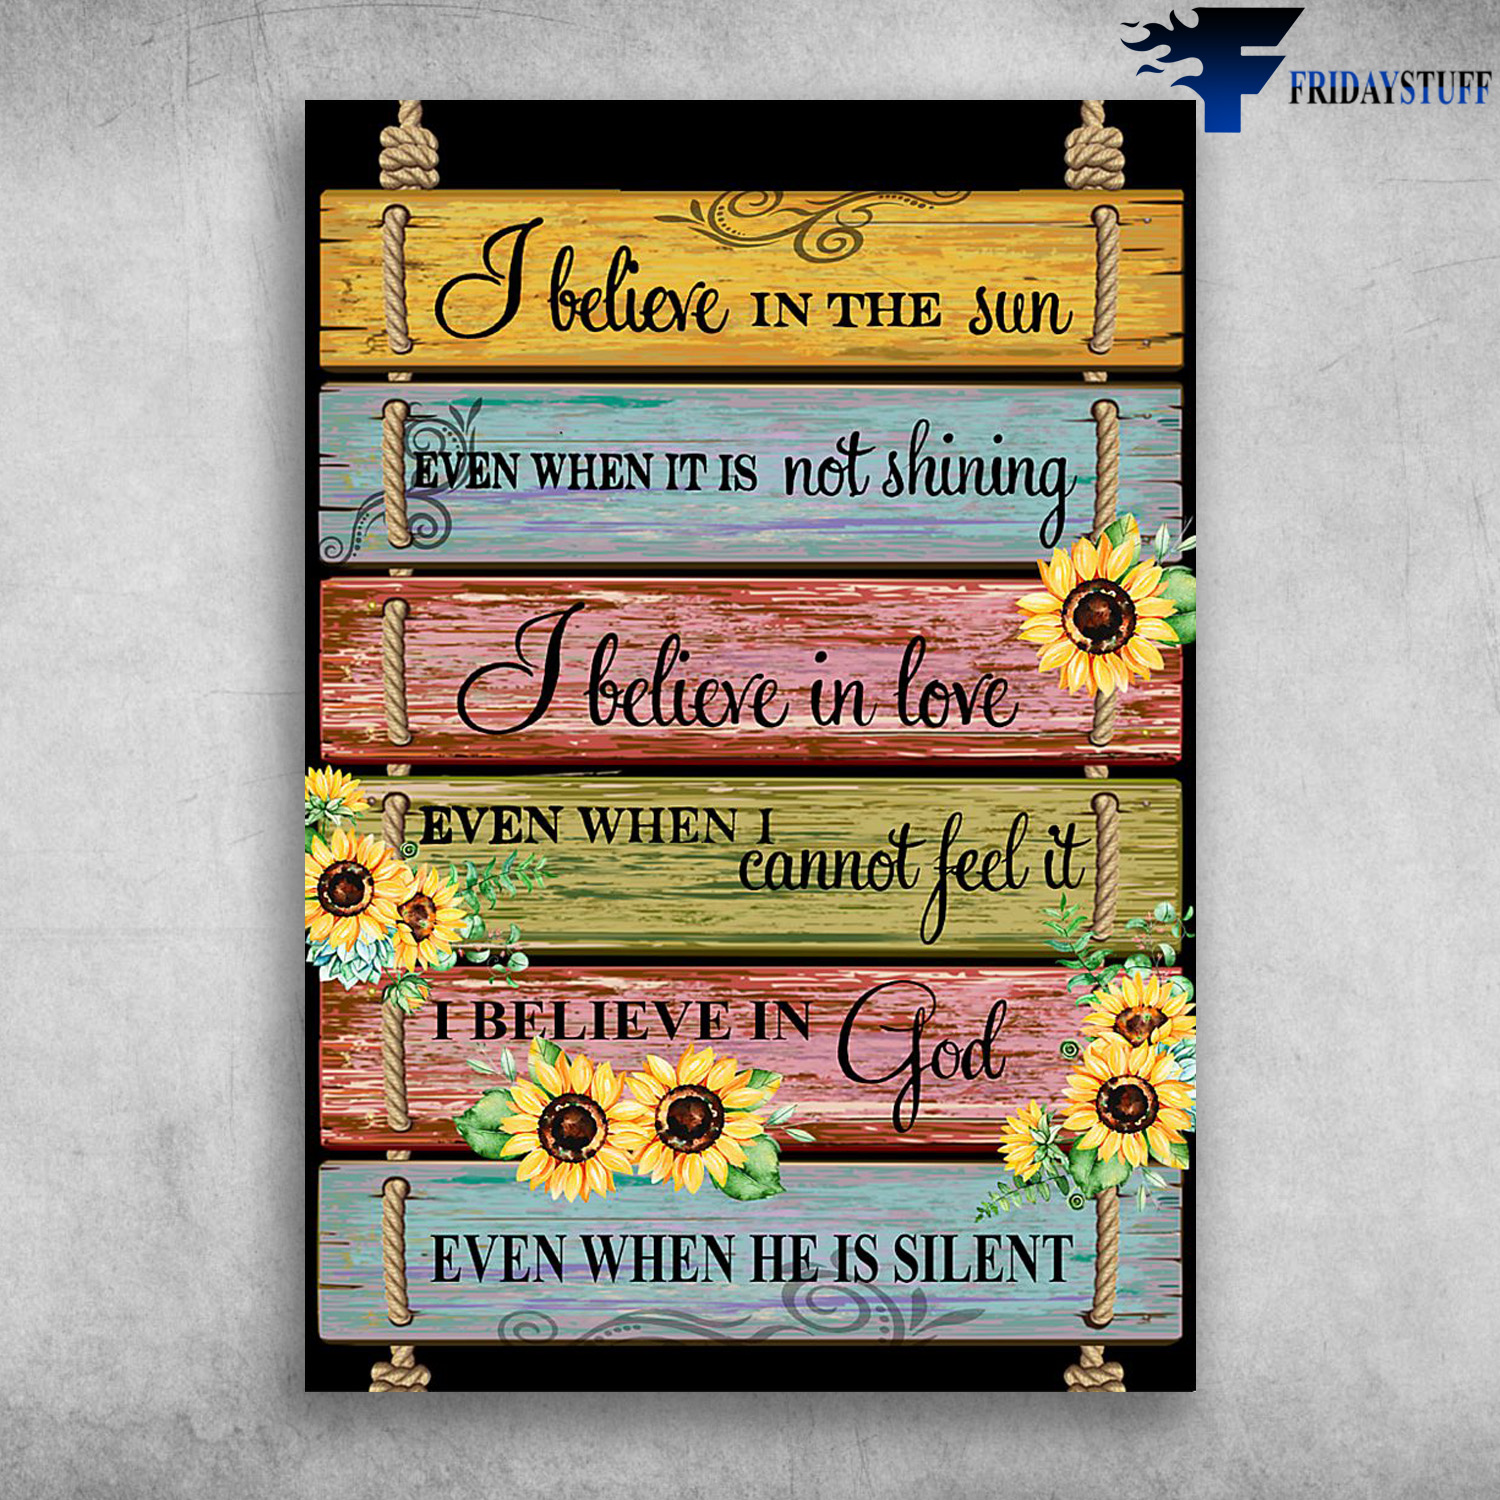 Sunflower Poster - I Believe In The Sun, Even When It Is Not Shining, I Believe In Love, Even When I Cannot Feel It, I Believe In God, Even When He Is Silent